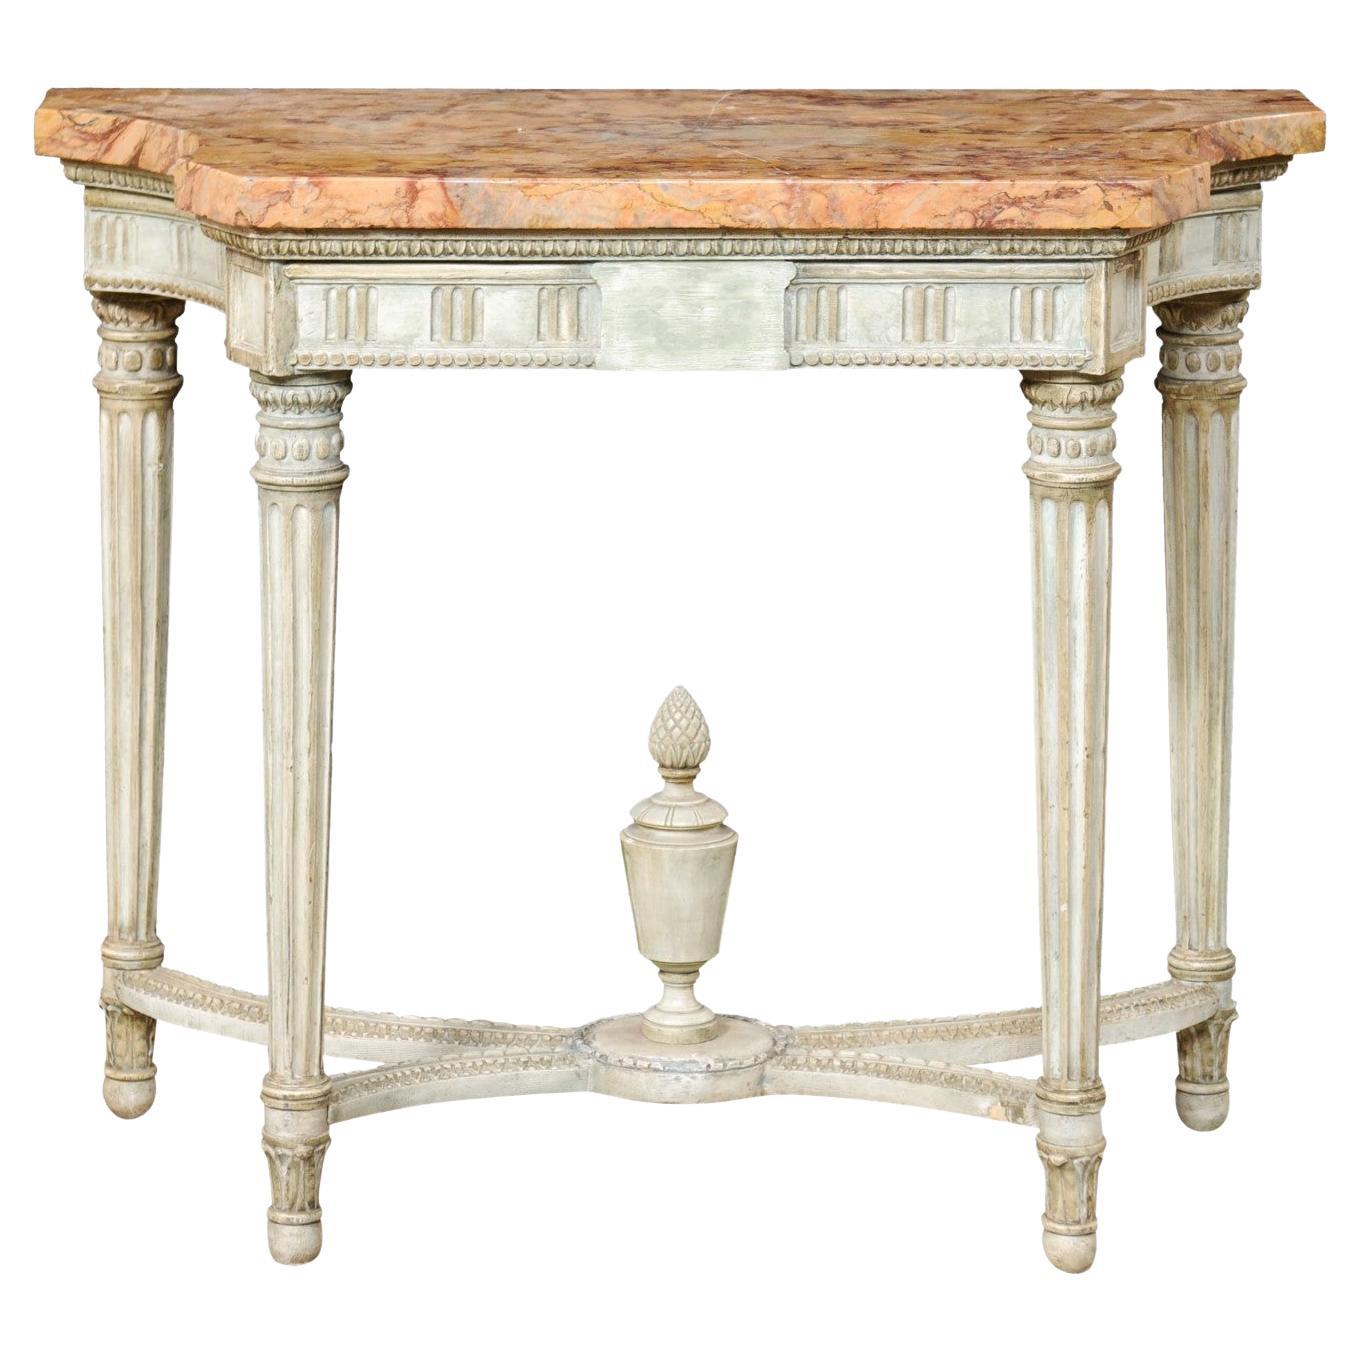 French Neoclassic Period Marble Top Console w/Carved Urn Finial at Underside